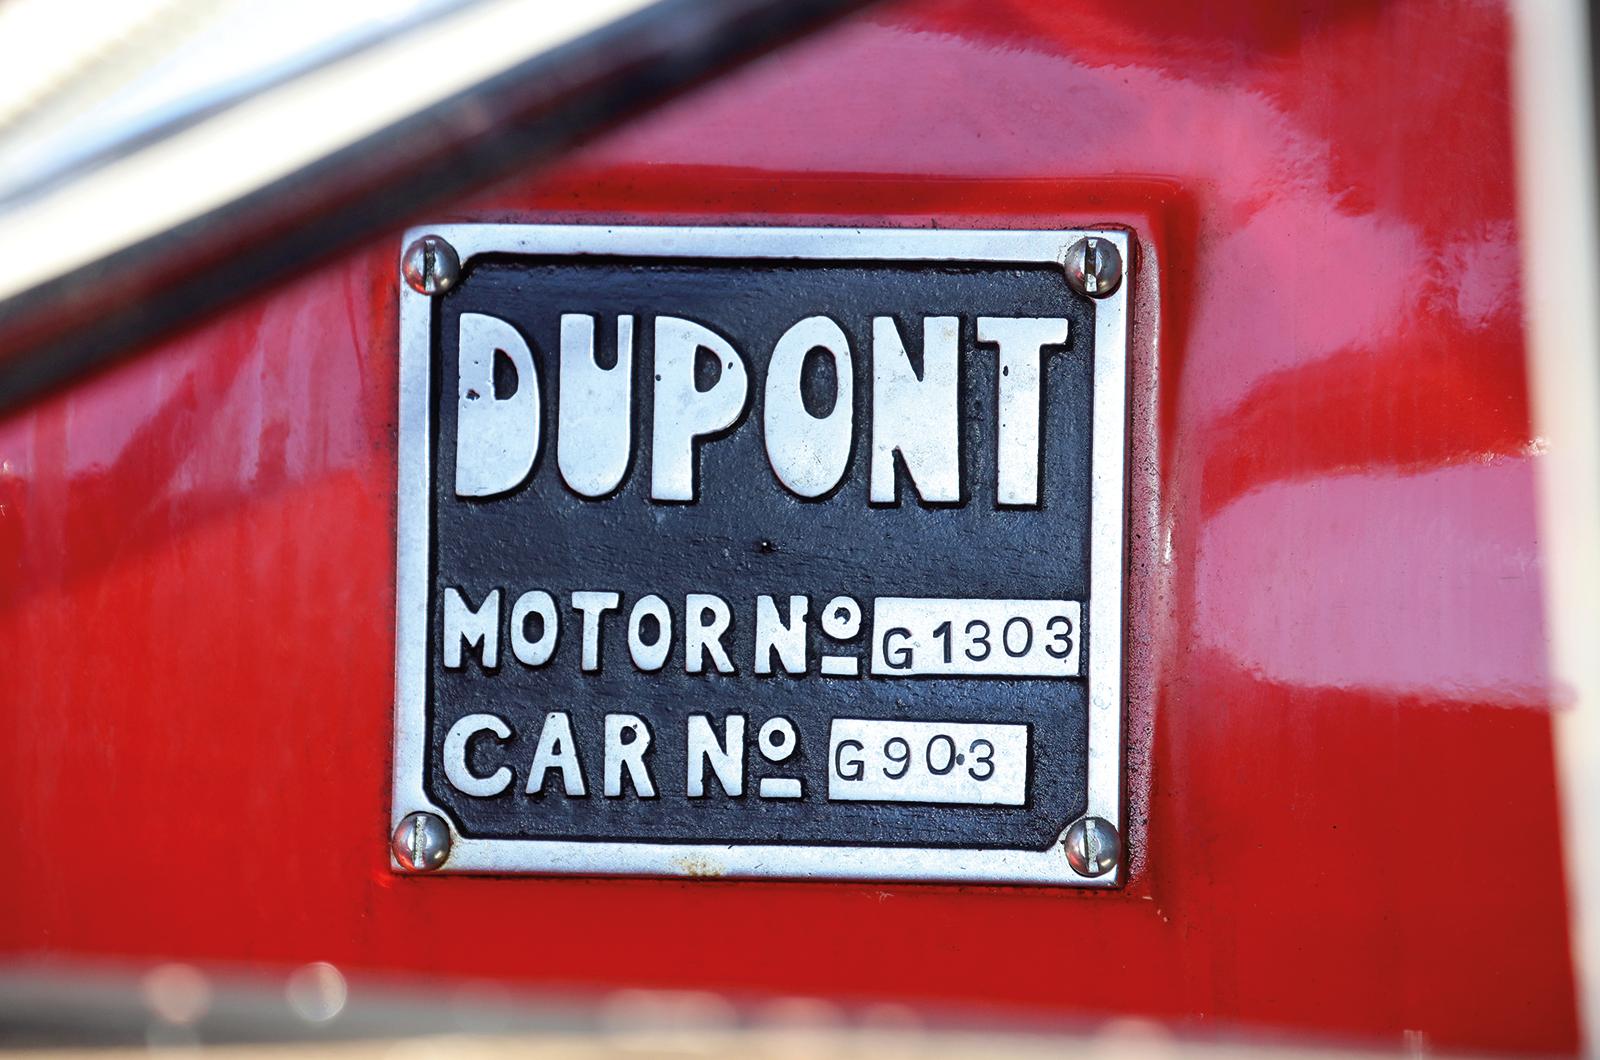 Classic & Sports Car – The forgotten allure of the duPont Model G Speedster